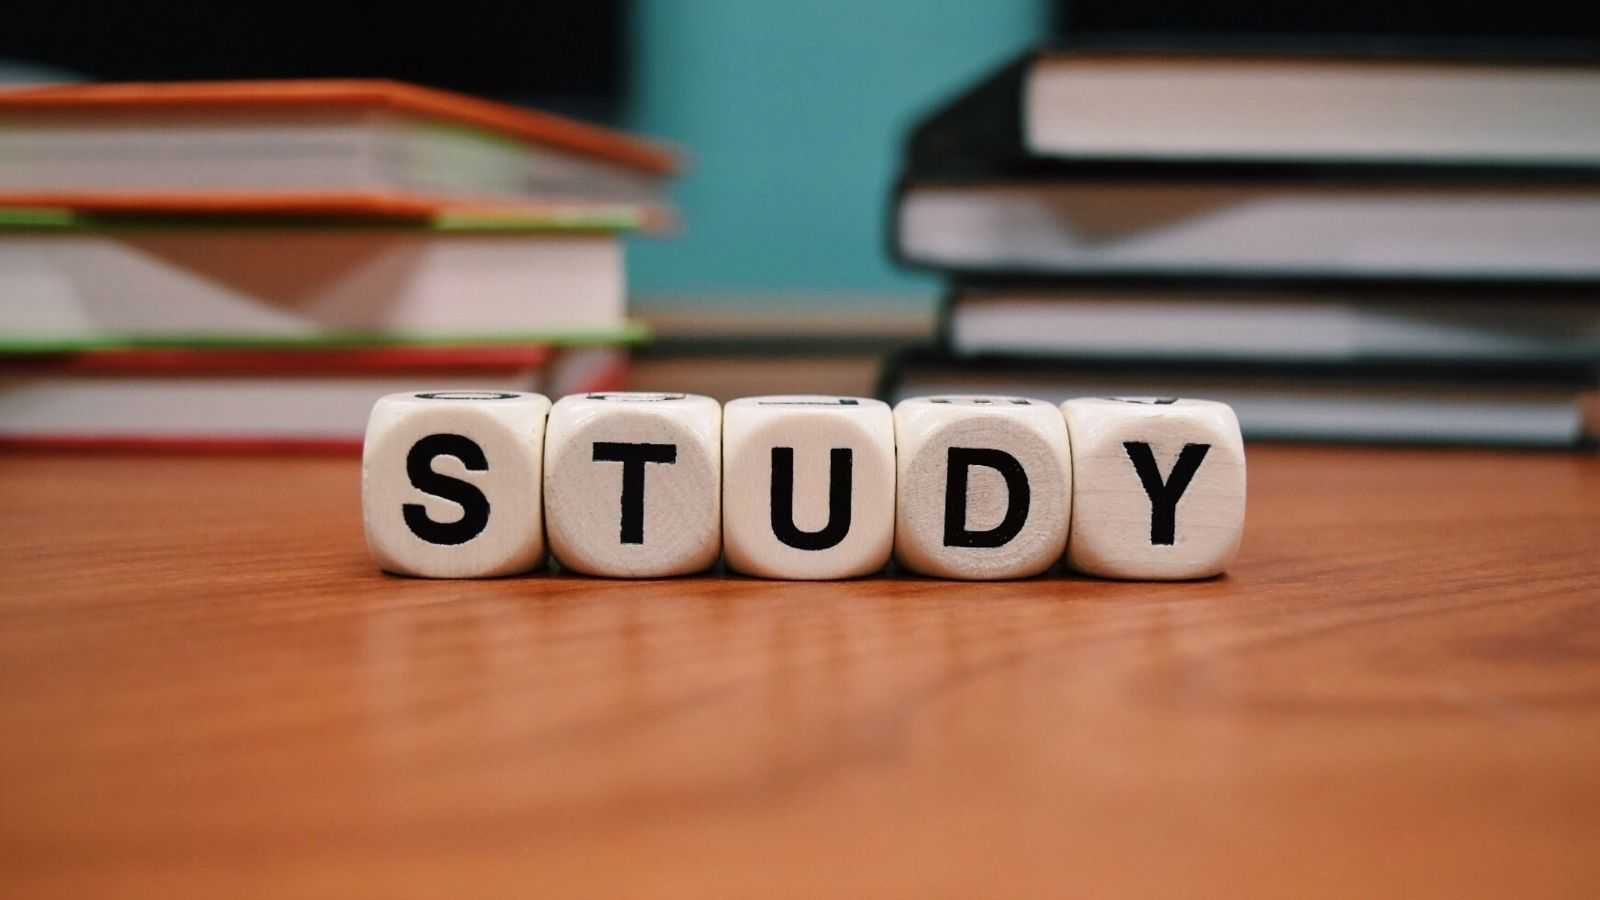 SaaS educational apps. A phot of cubes with letters showing the word "study."